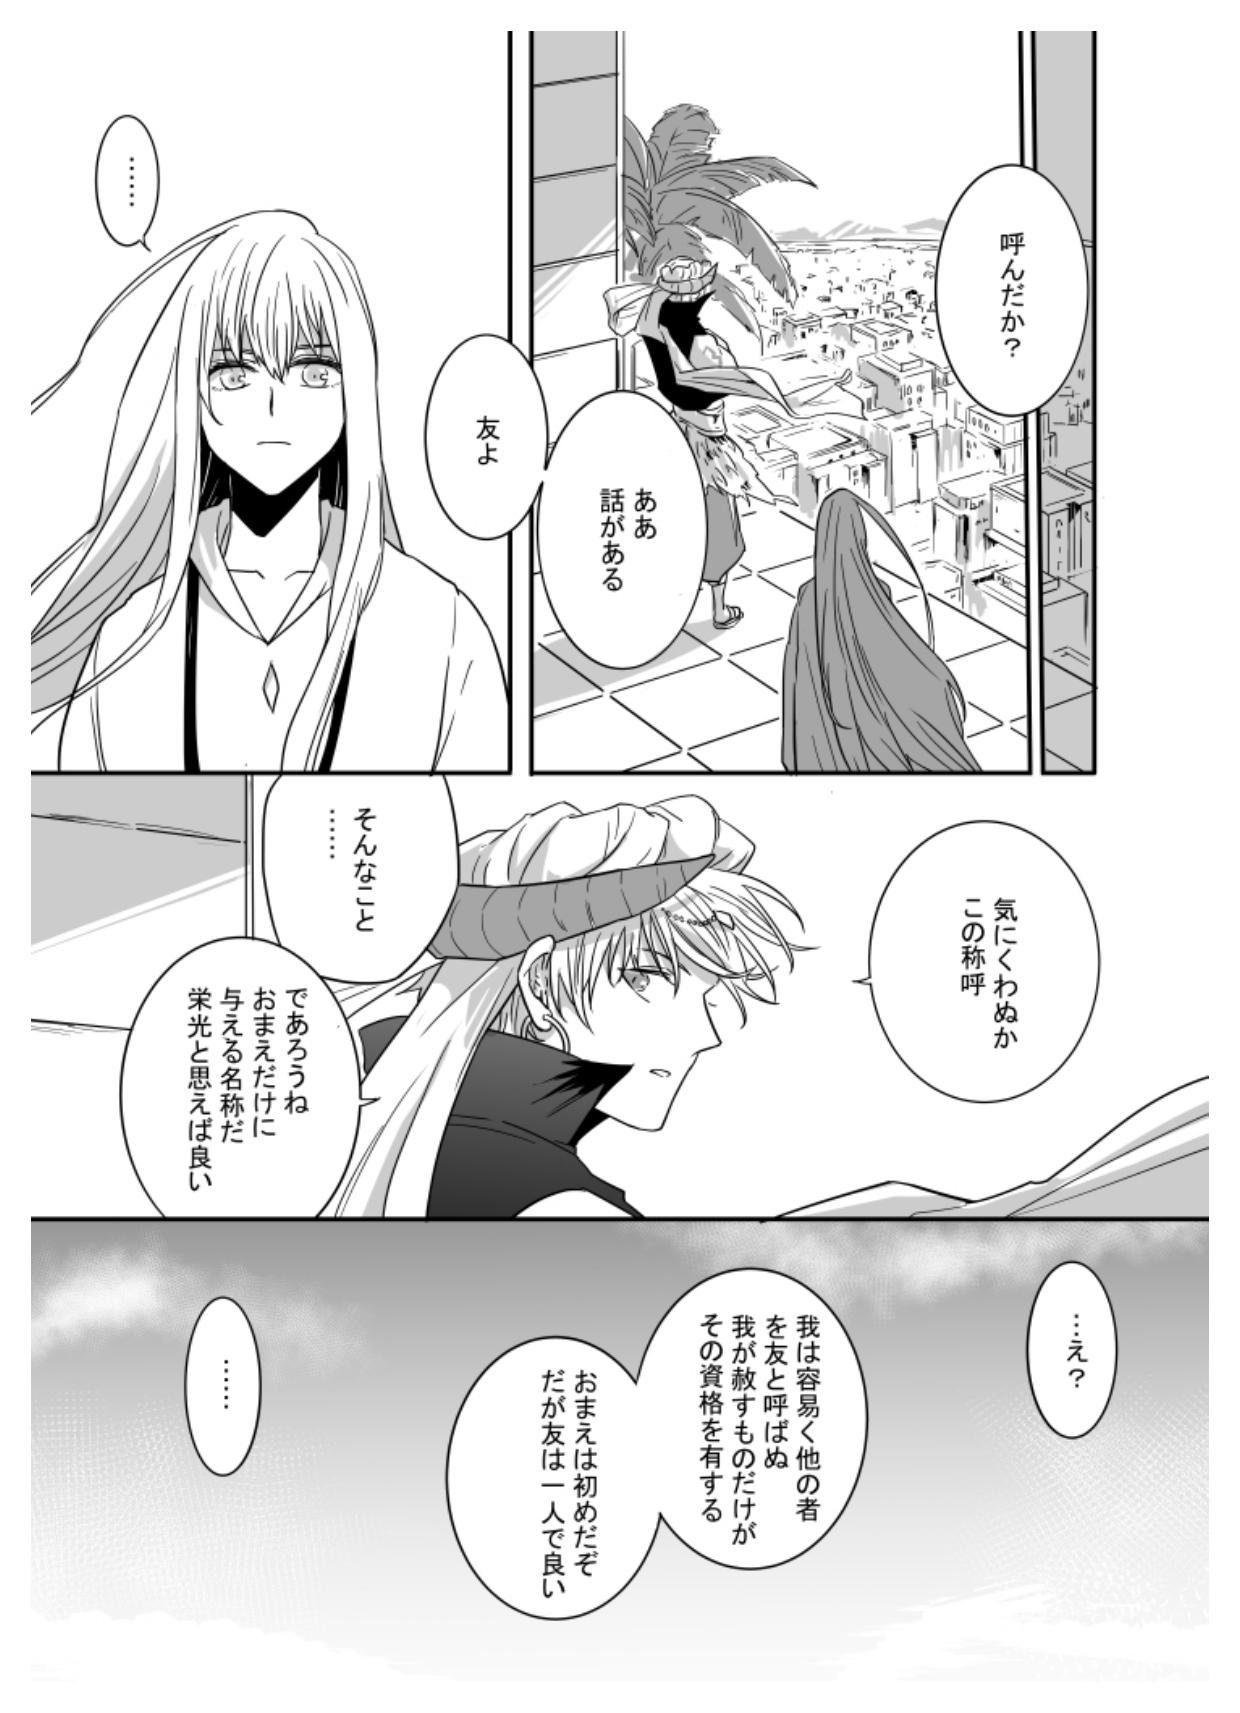 Vietnamese If I have soul - Fate grand order Cameltoe - Page 11